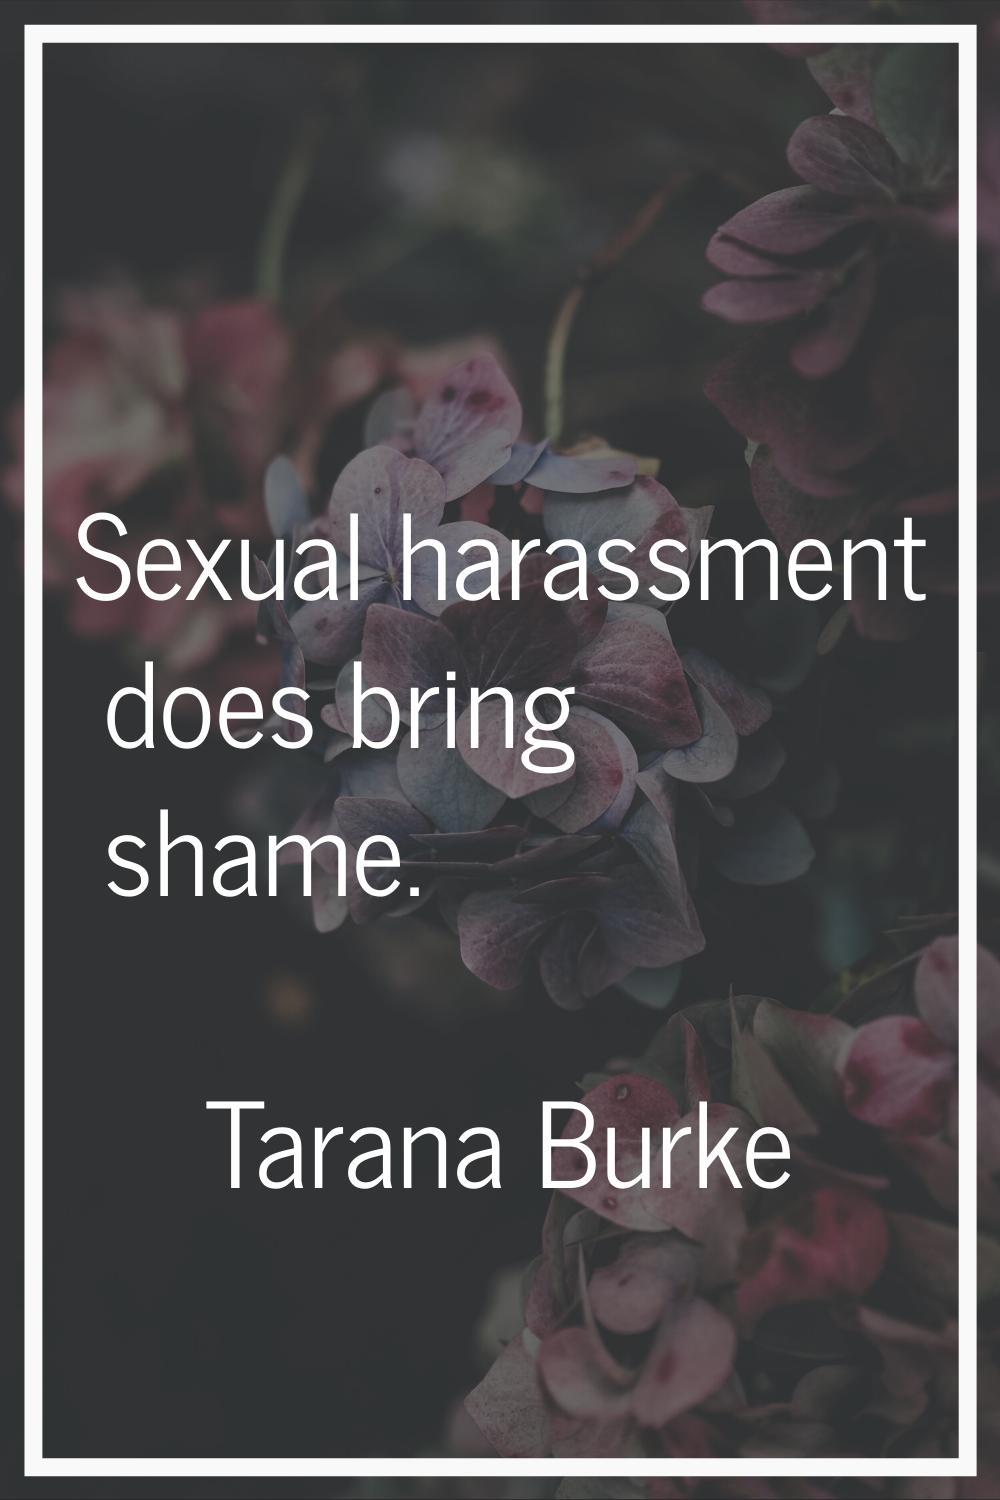 Sexual harassment does bring shame.